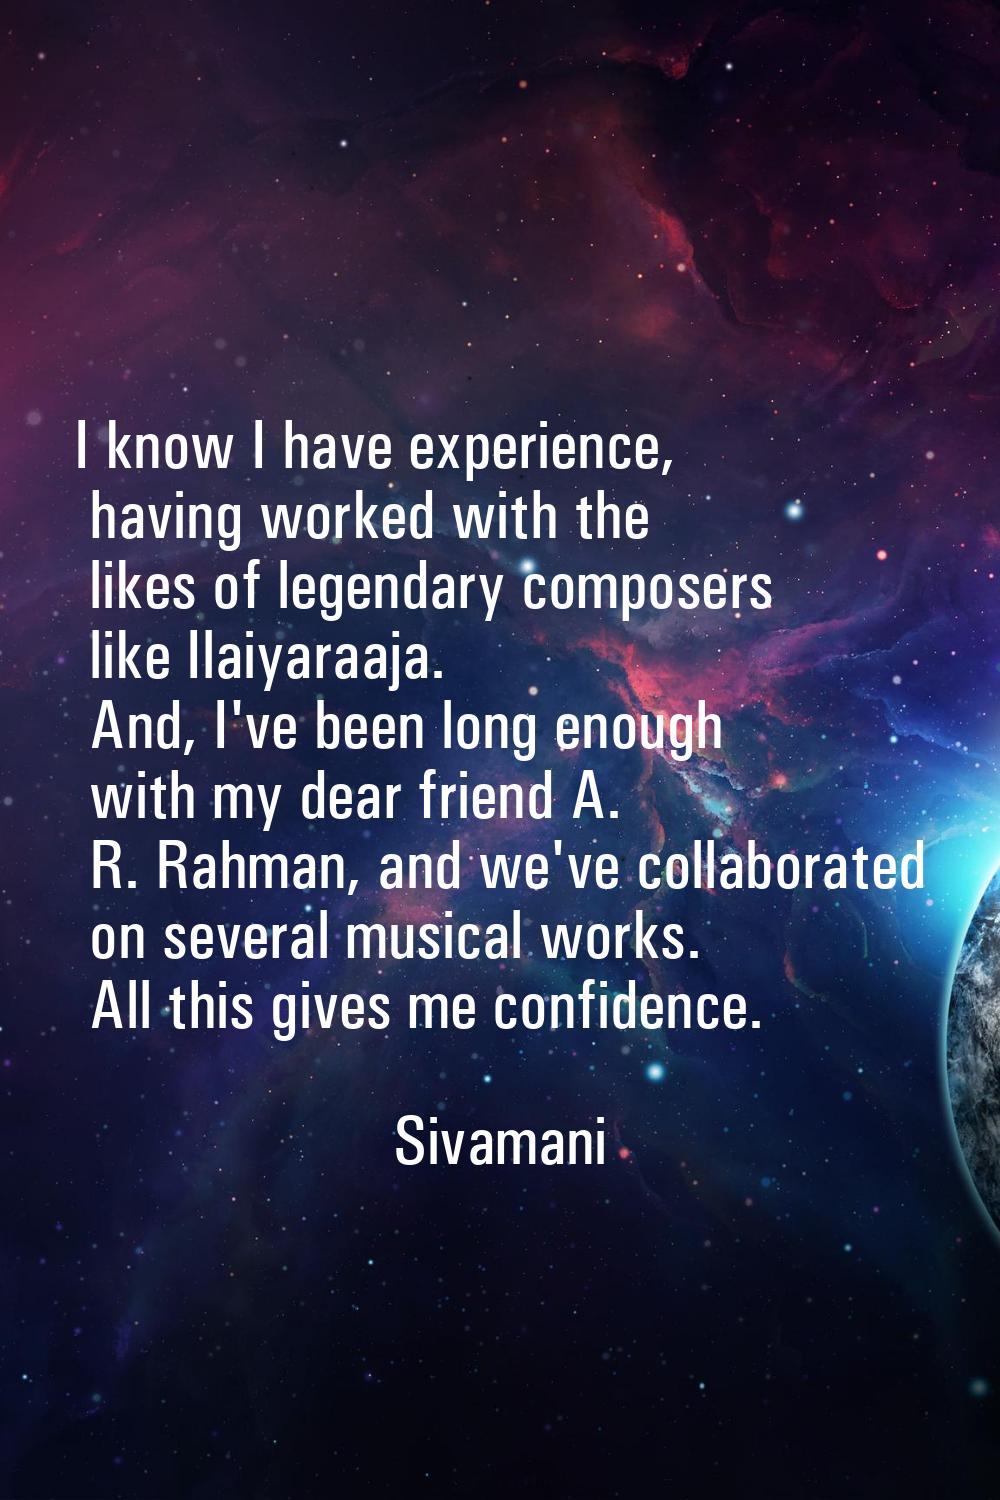 I know I have experience, having worked with the likes of legendary composers like Ilaiyaraaja. And